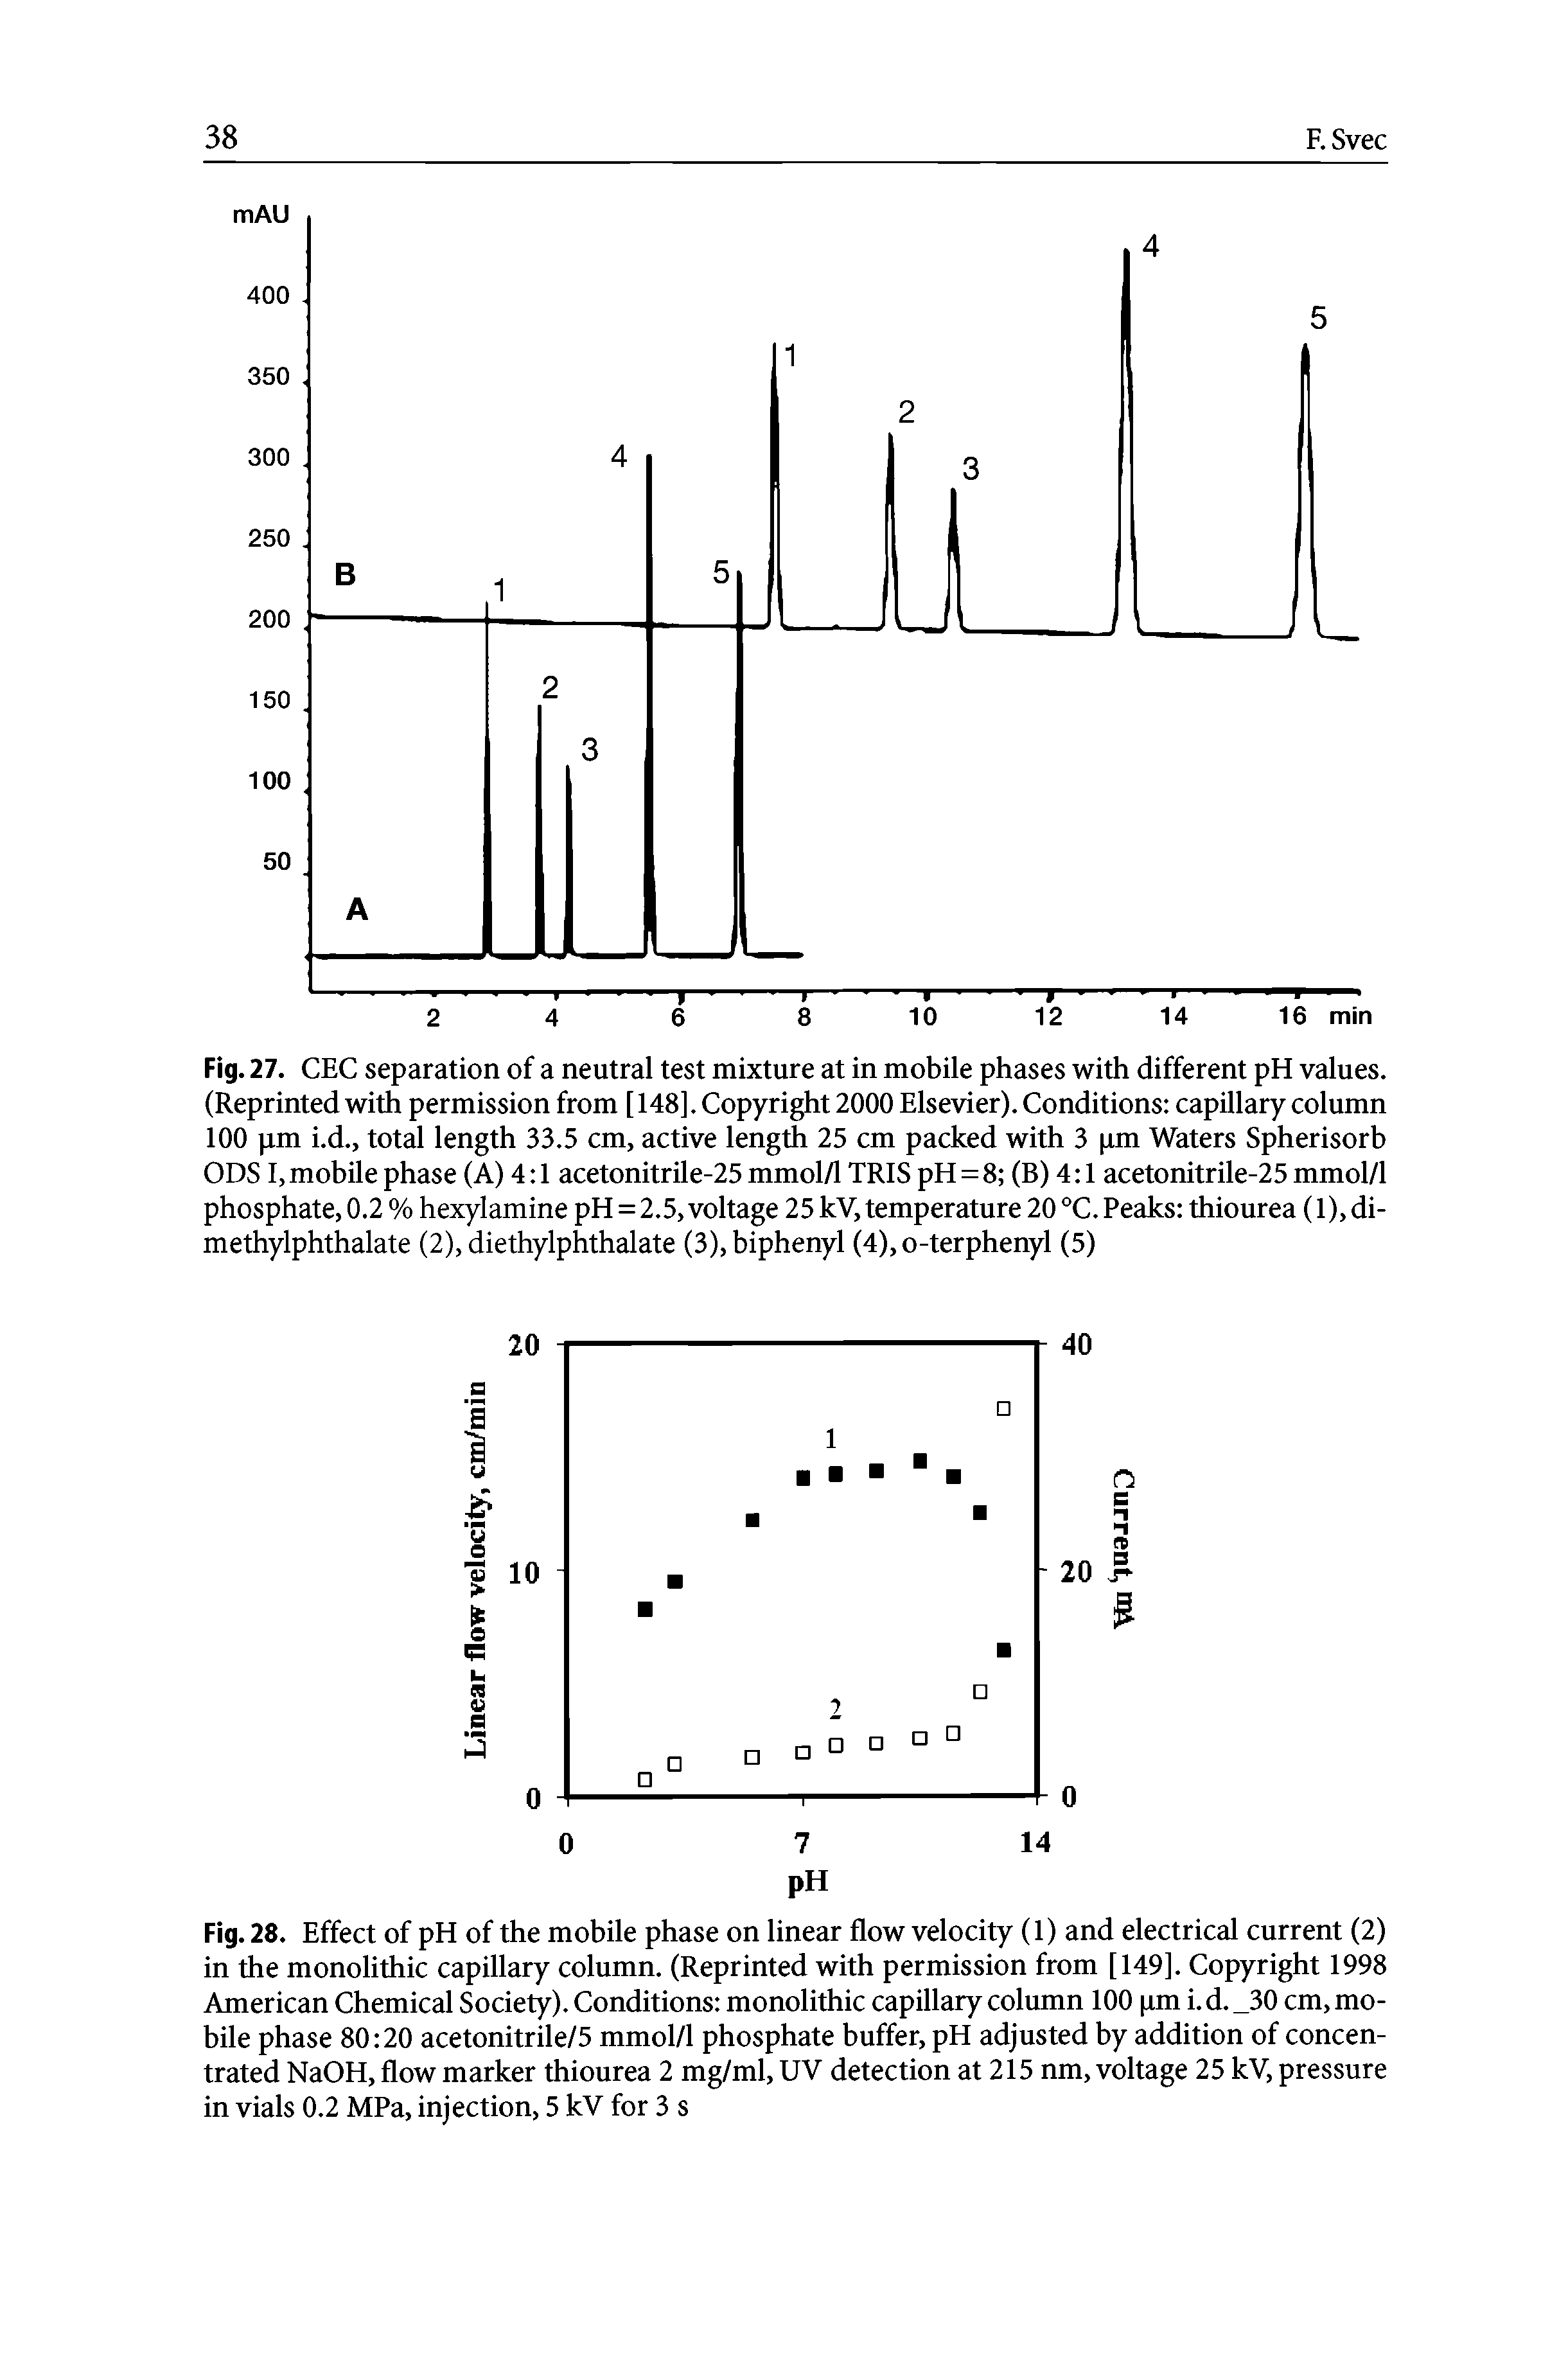 Fig. 28. Effect of pH of the mobile phase on linear flow velocity (1) and electrical current (2) in the monolithic capillary column. (Reprinted with permission from [149]. Copyright 1998 American Chemical Society). Conditions monolithic capillary column 100 pm i. d. 30 cm, mobile phase 80 20 acetonitrile/5 mmol/1 phosphate buffer, pH adjusted by addition of concentrated NaOH, flow marker thiourea 2 mg/ml, UV detection at 215 nm, voltage 25 kV, pressure in vials 0.2 MPa, injection, 5 kV for 3 s...